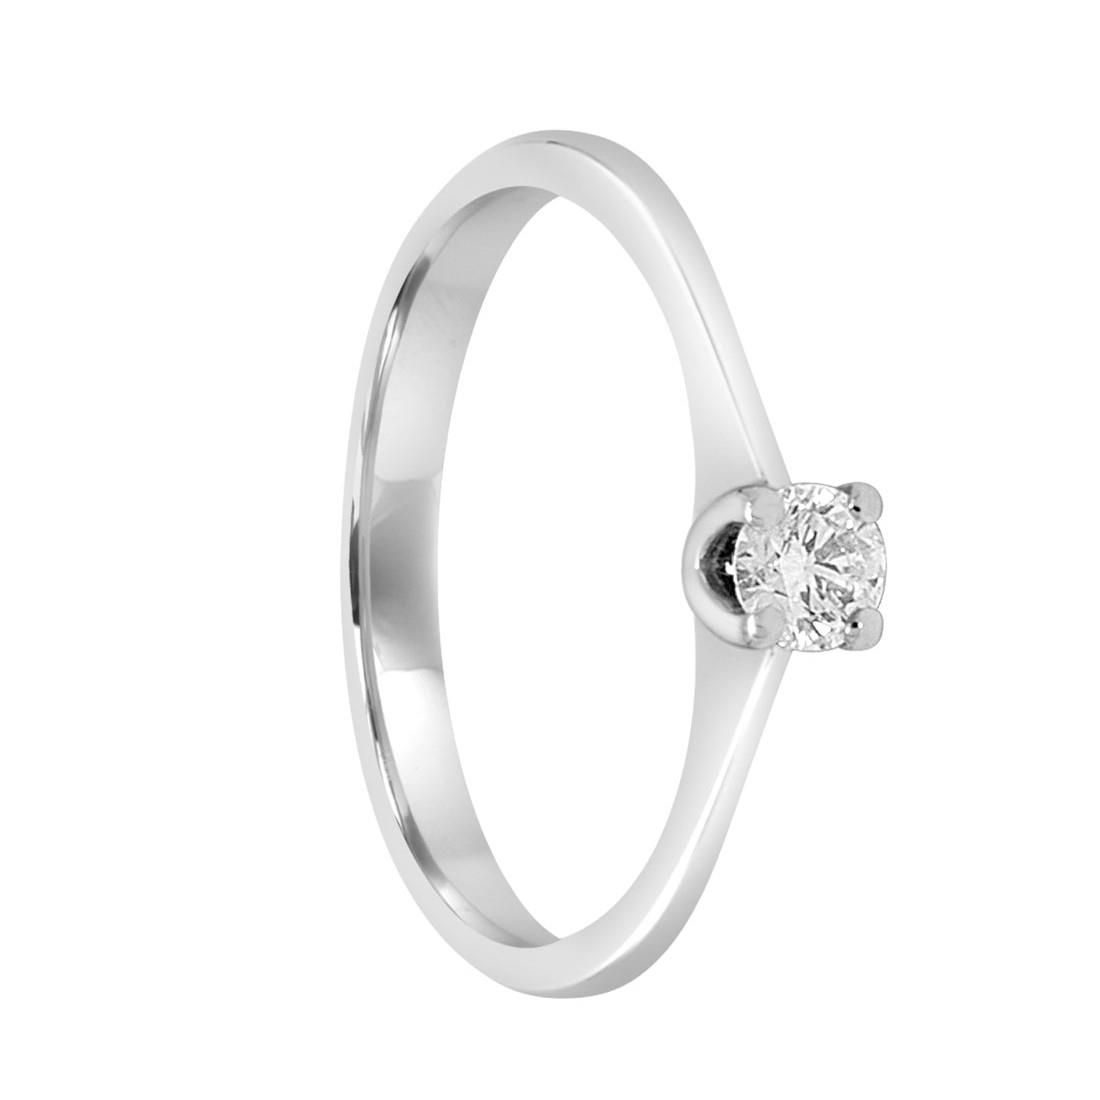  White gold solitaire with diamond ct 0.21 color H, clarity VS1, size N - ORO&CO